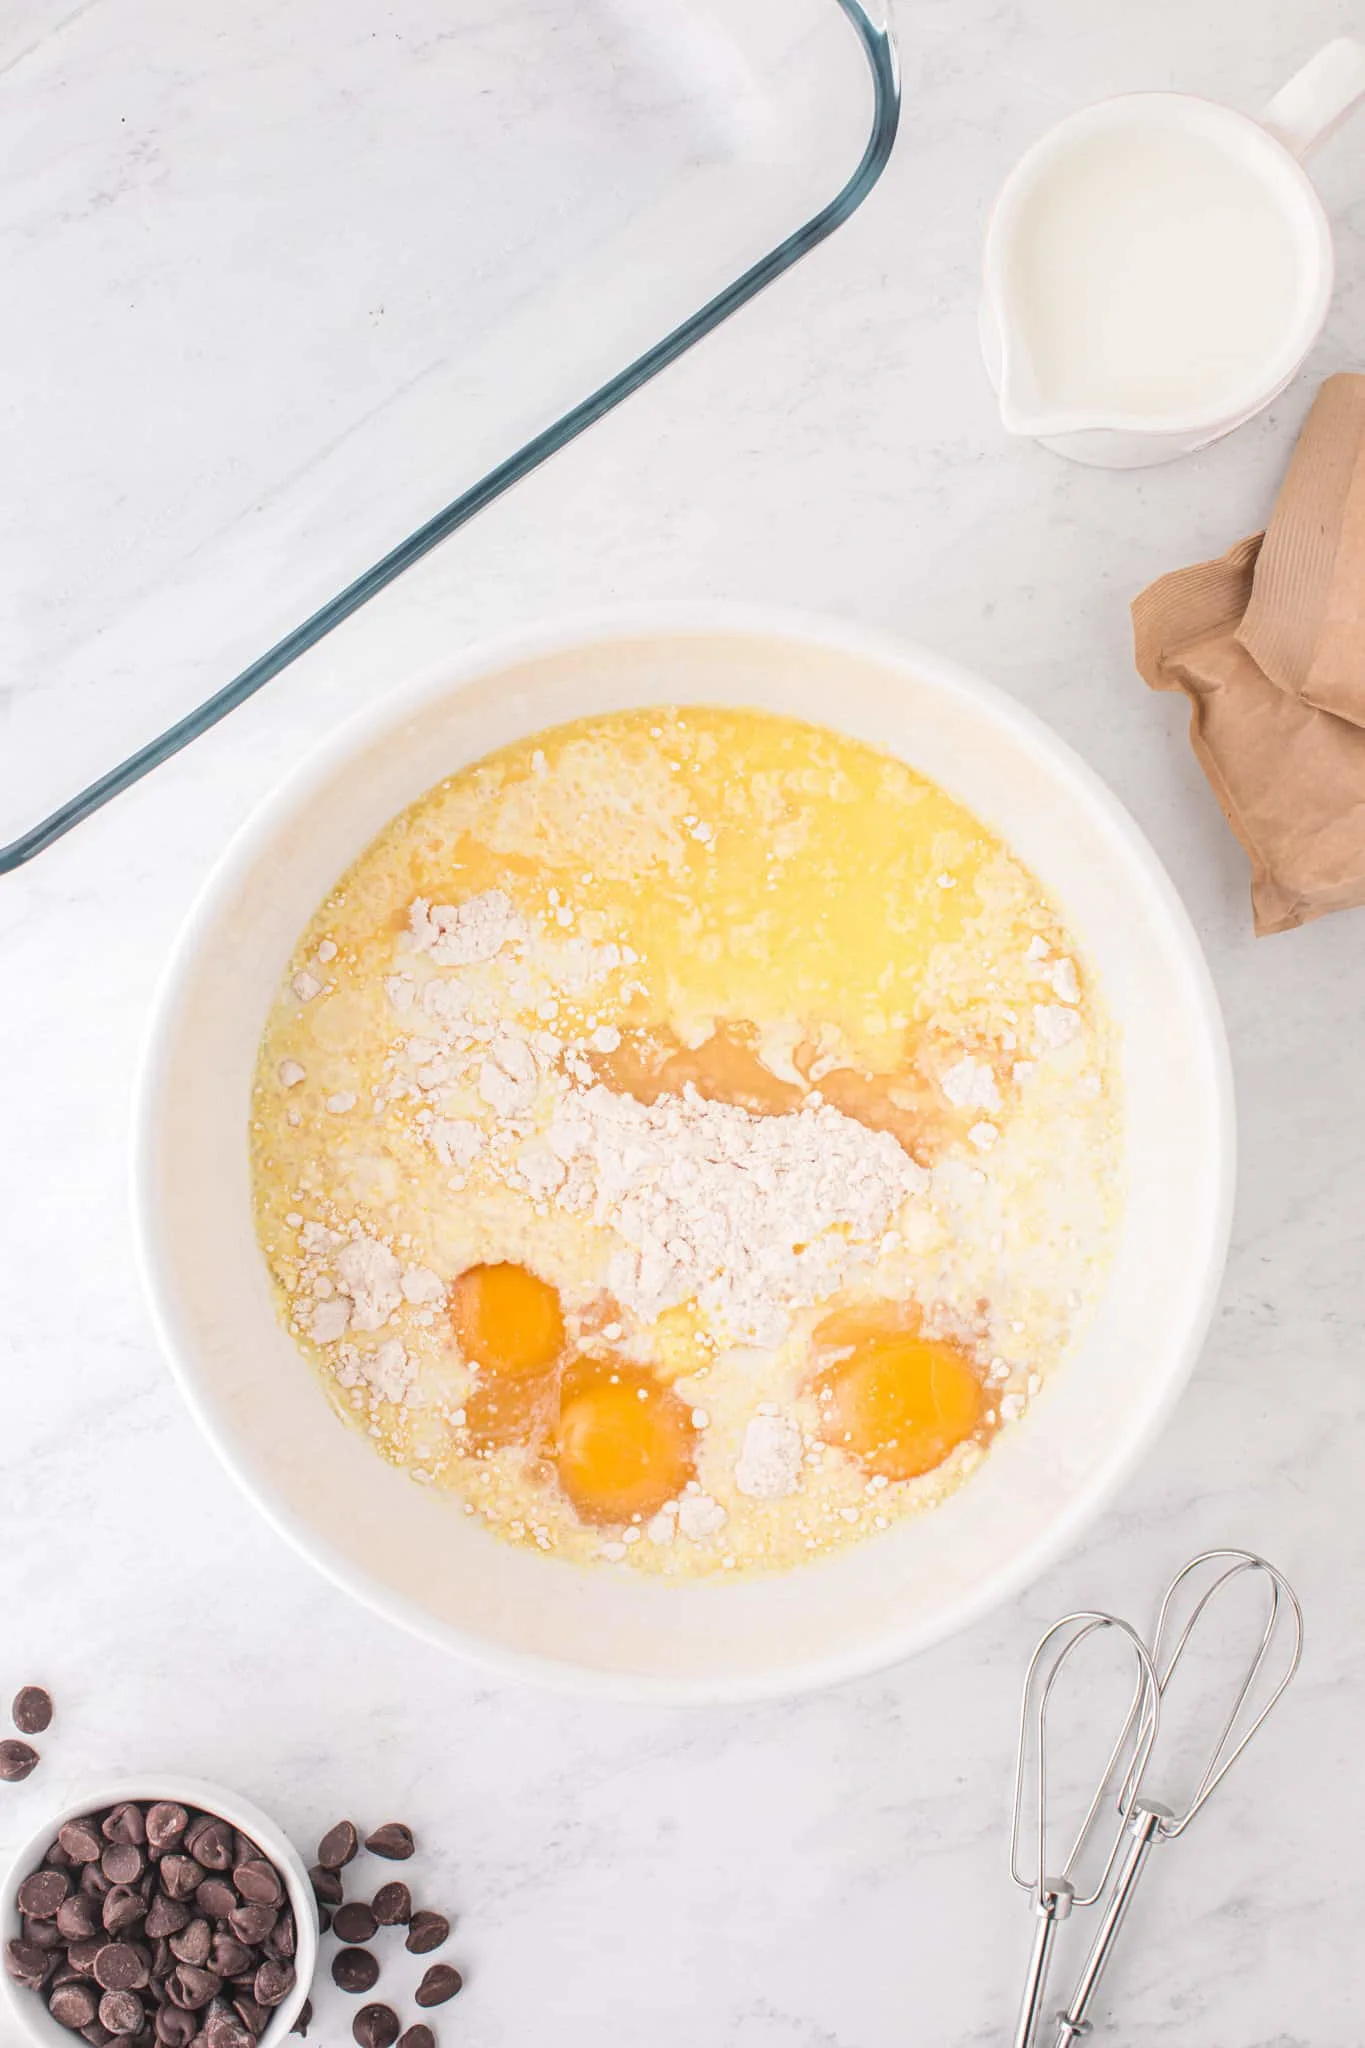 cake mix, eggs, cream and melted butter in a mixing bowl